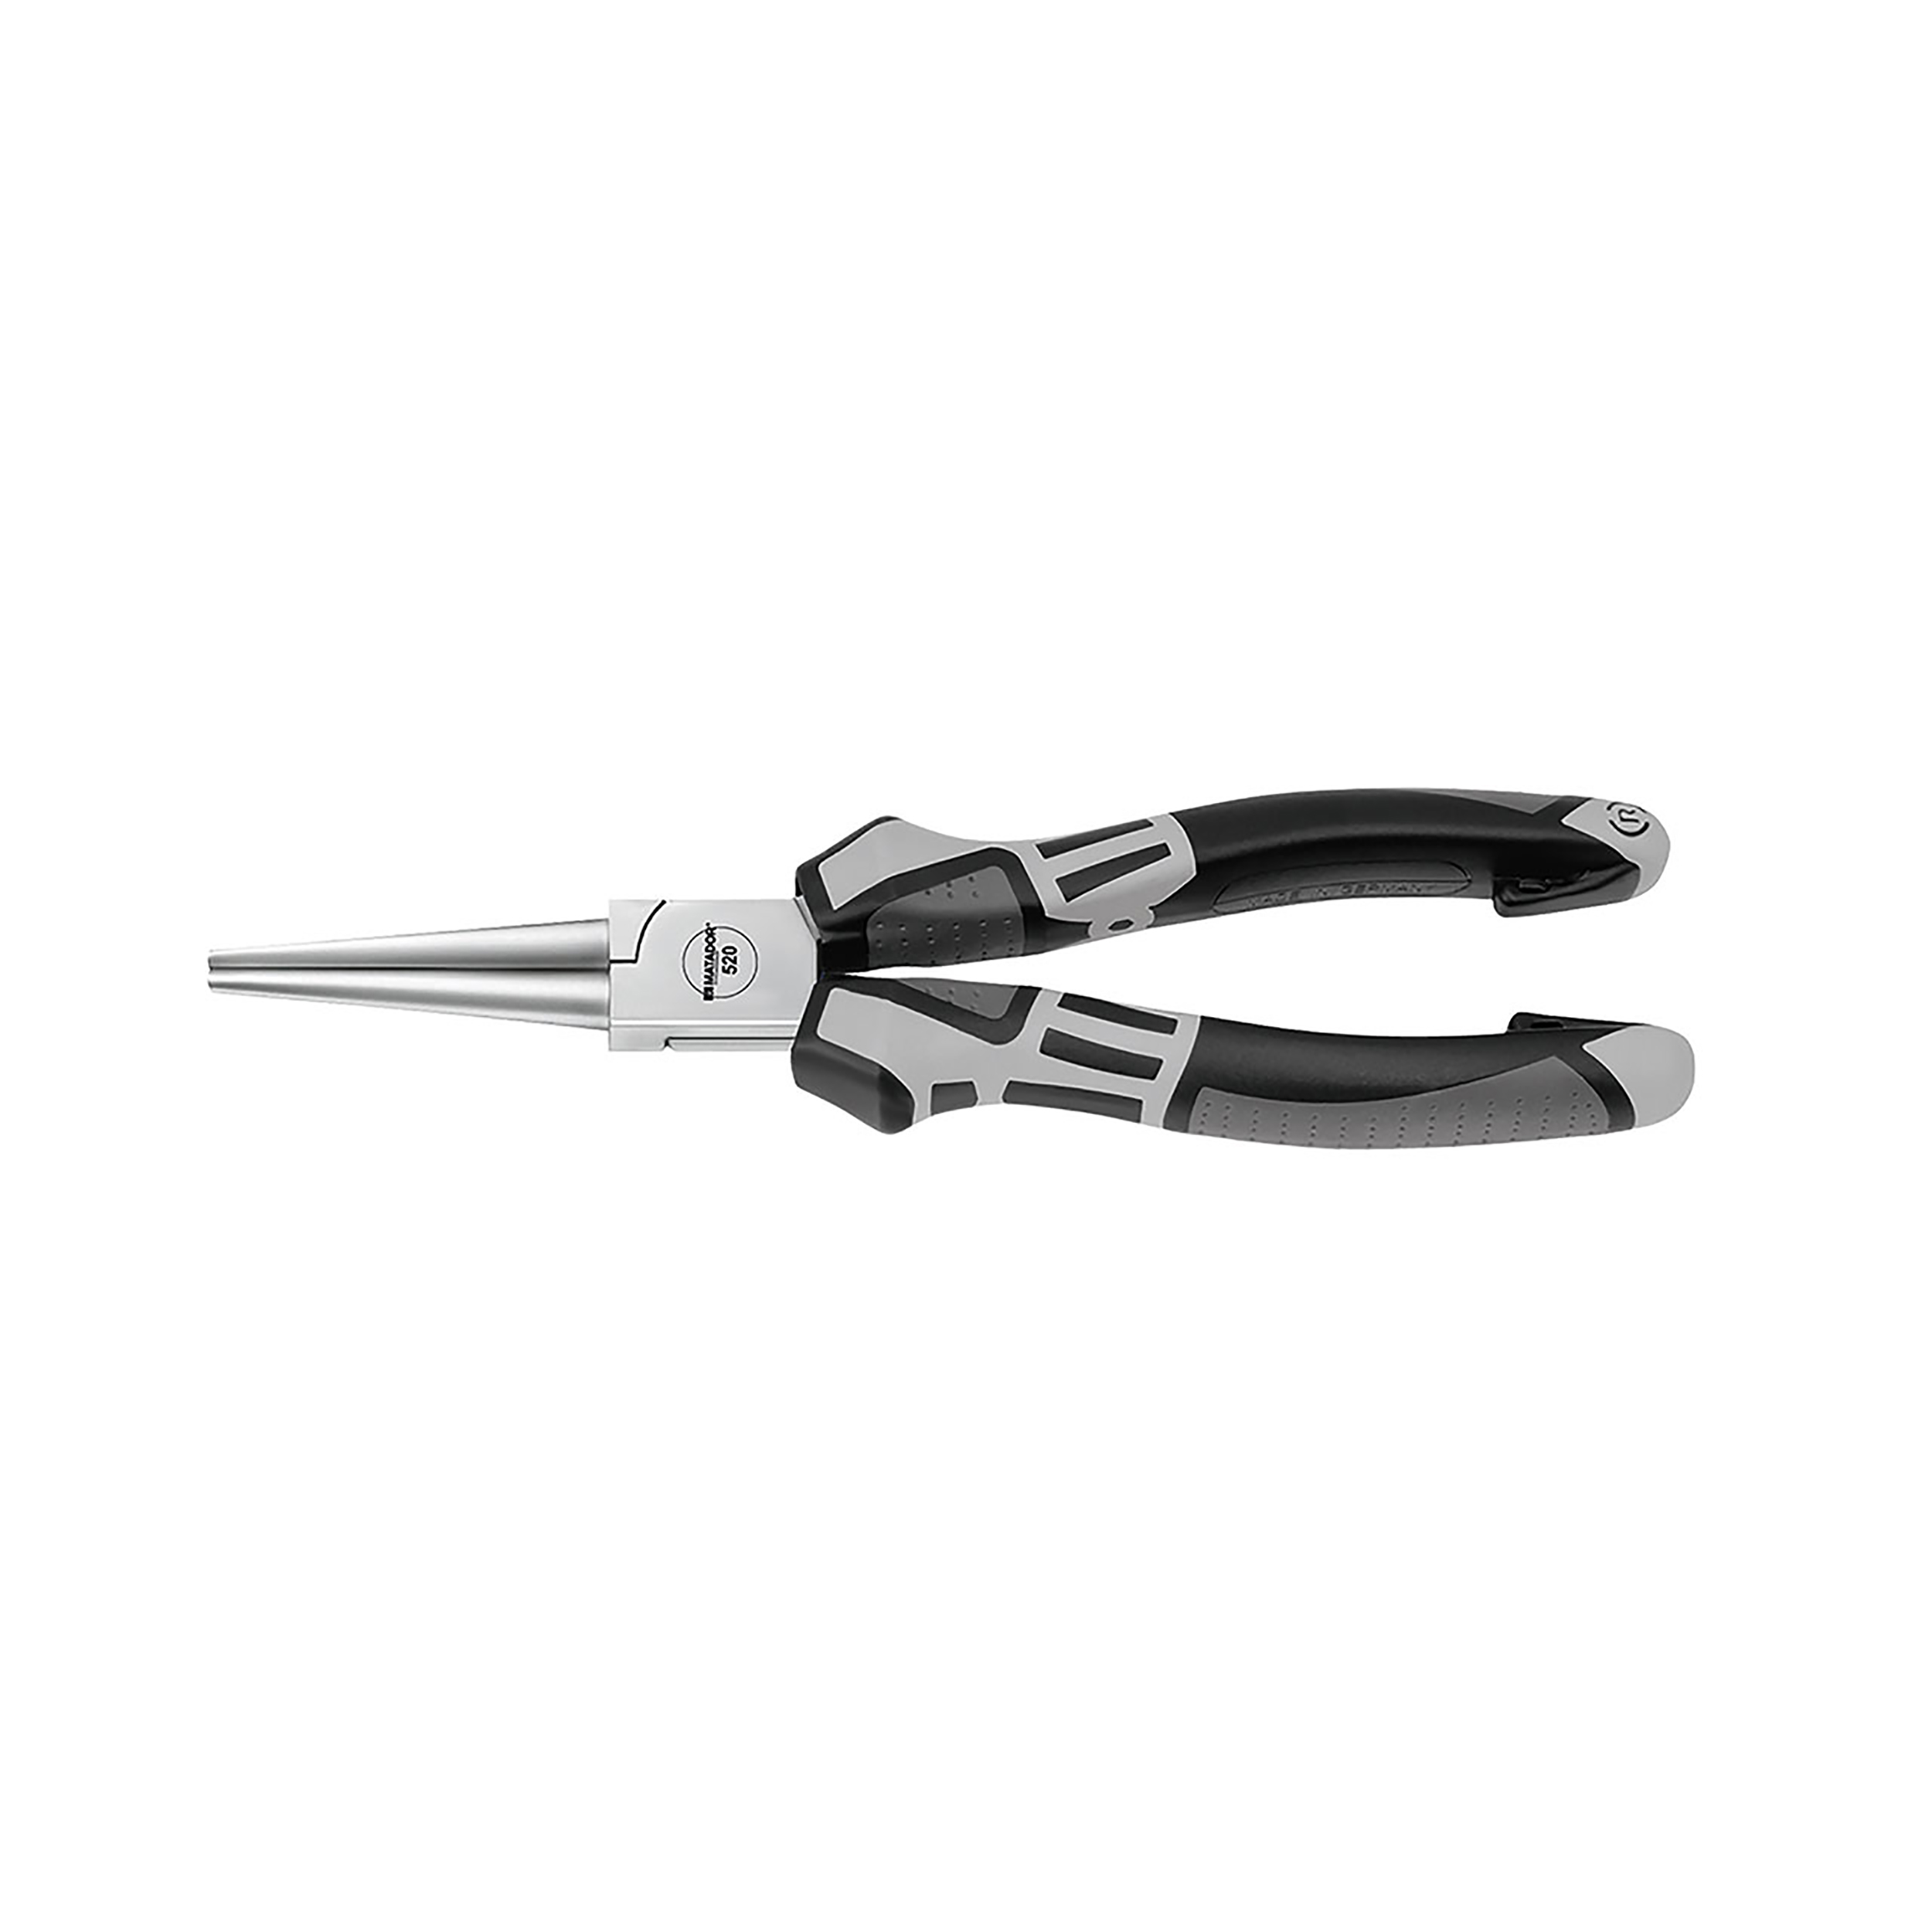 Langbeck round nose pliers, DIN ISO 5745, 160 mm (6.1/4"), MATADOR item no.: 05200160